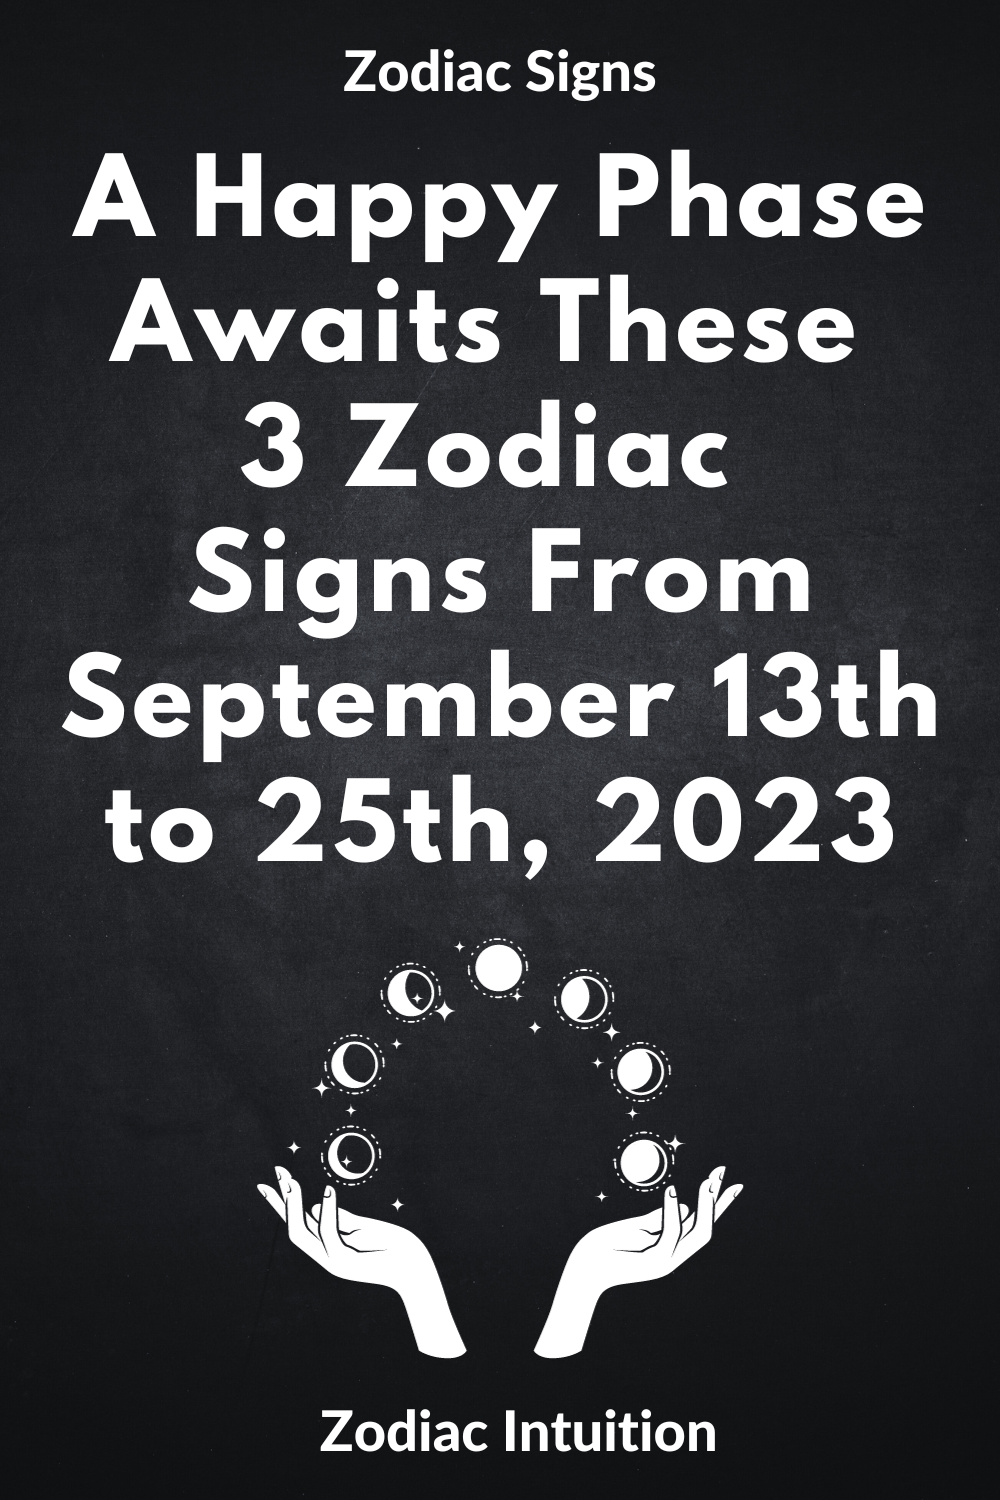 A Happy Phase Awaits These 3 Zodiac Signs from September 13th to 25th, 2023